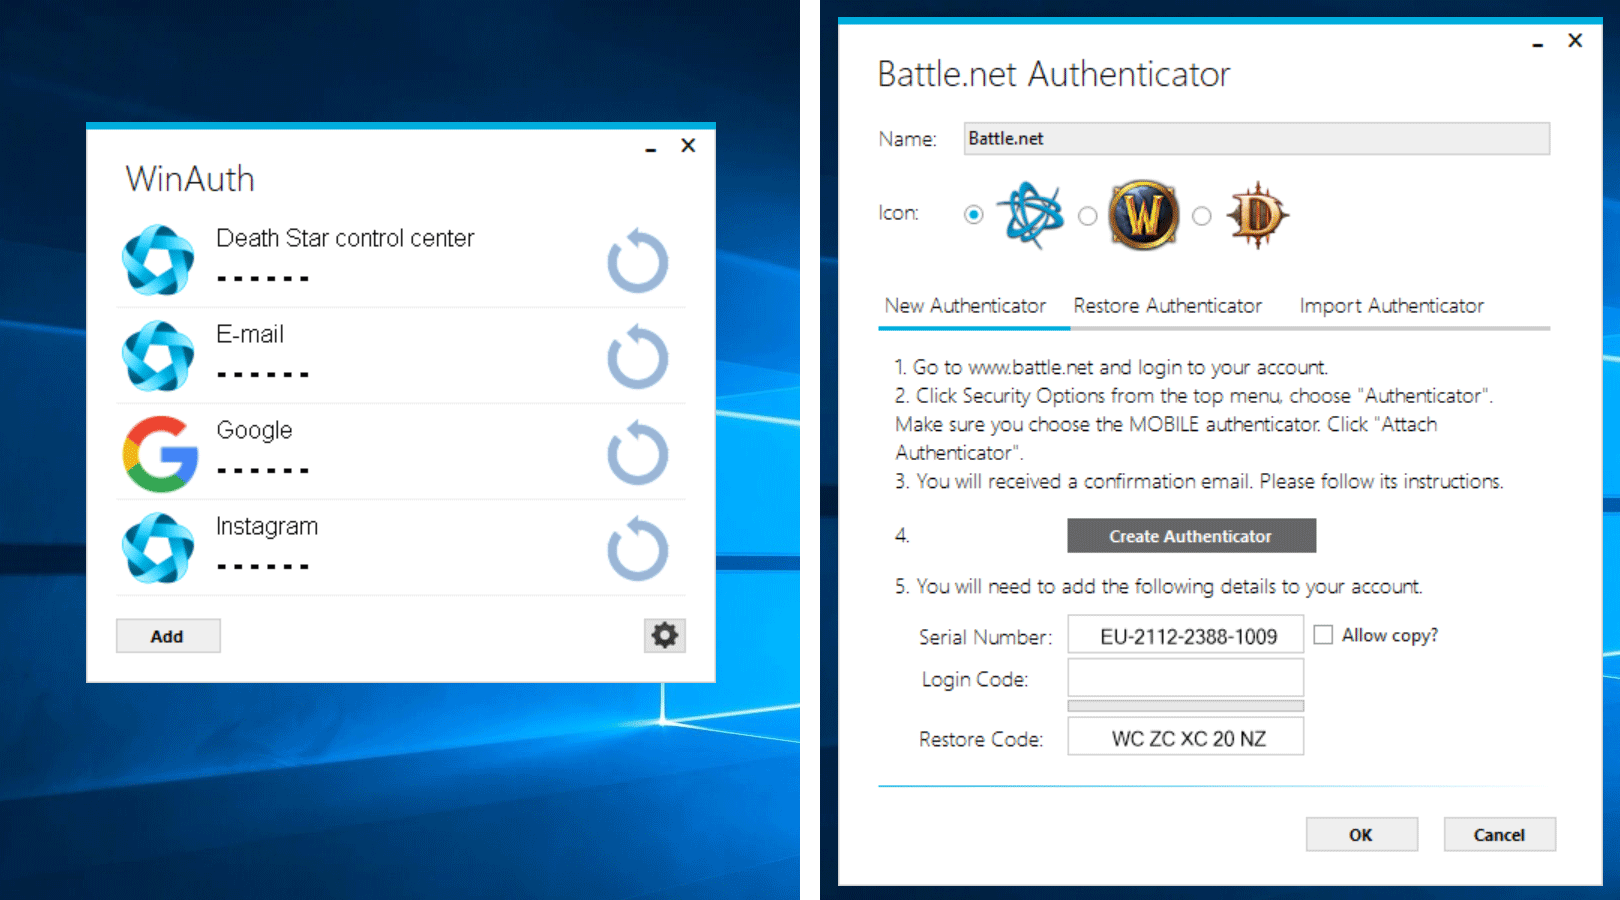 WinAuth is one of the few authenticator apps for Windows